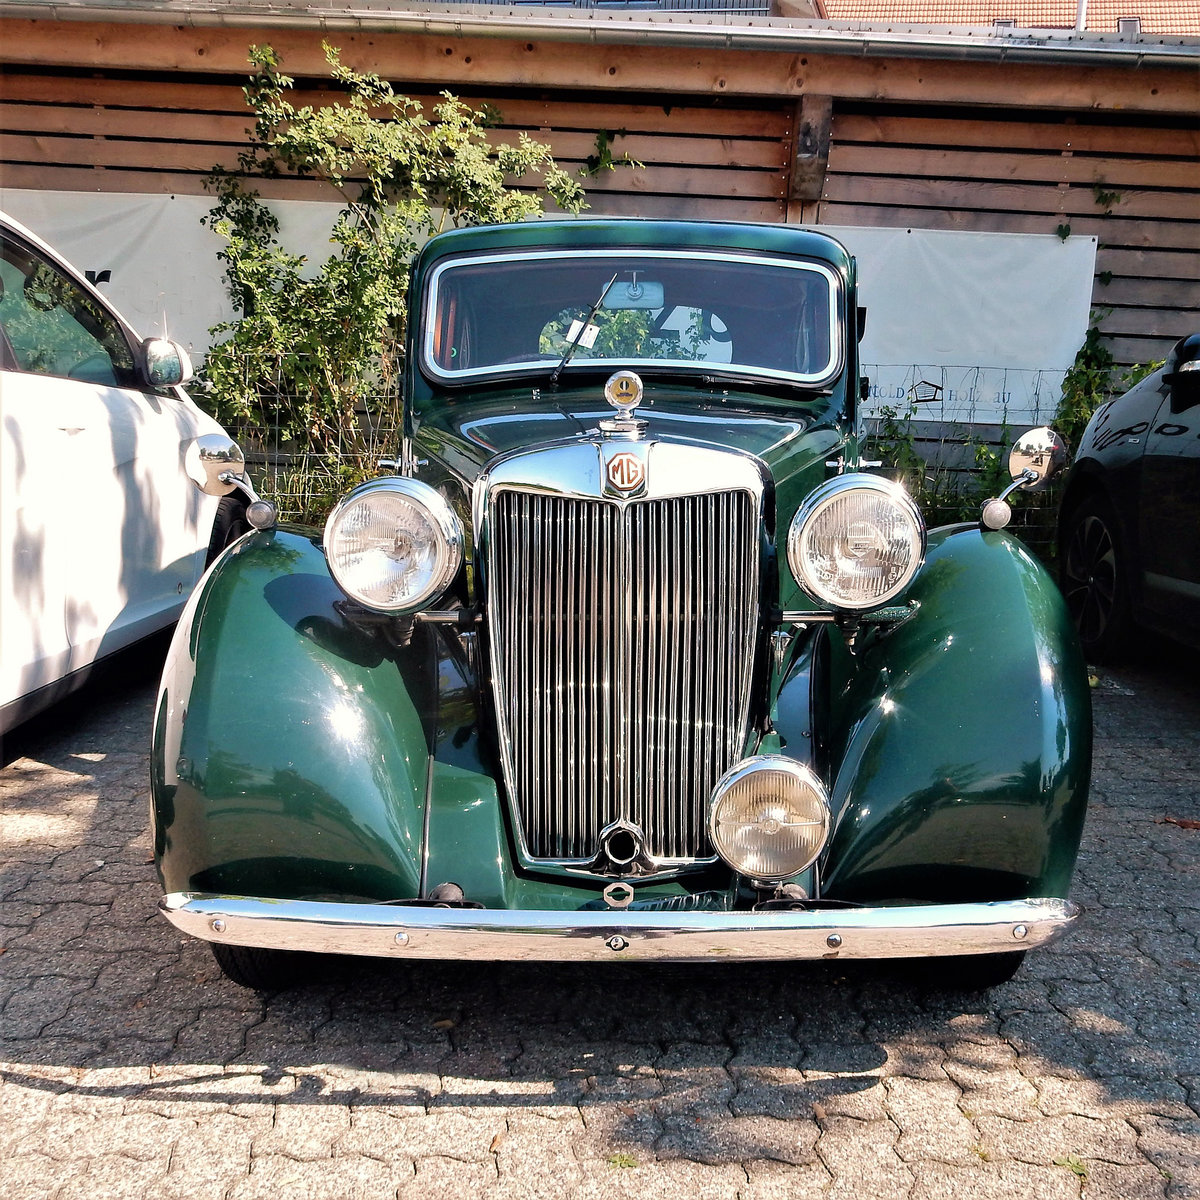 MG Series Y (1947-1953), Frontansicht - 19.07.2018